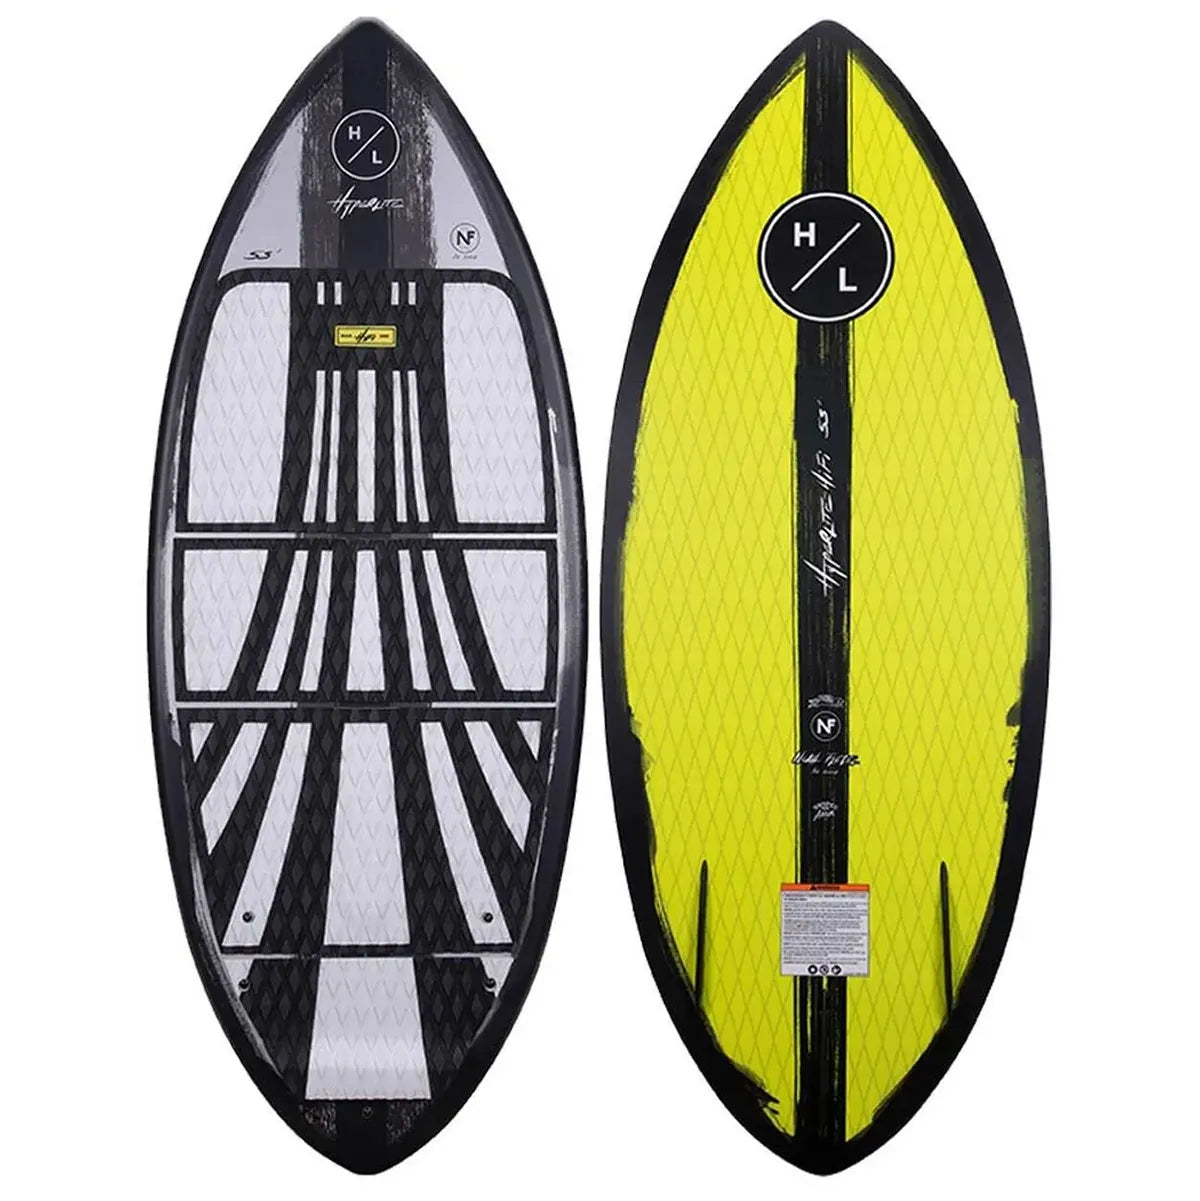 A yellow and black HYPERLITE Hi-Fi 2022 wakeboard with DuraShell Construction on a white background.